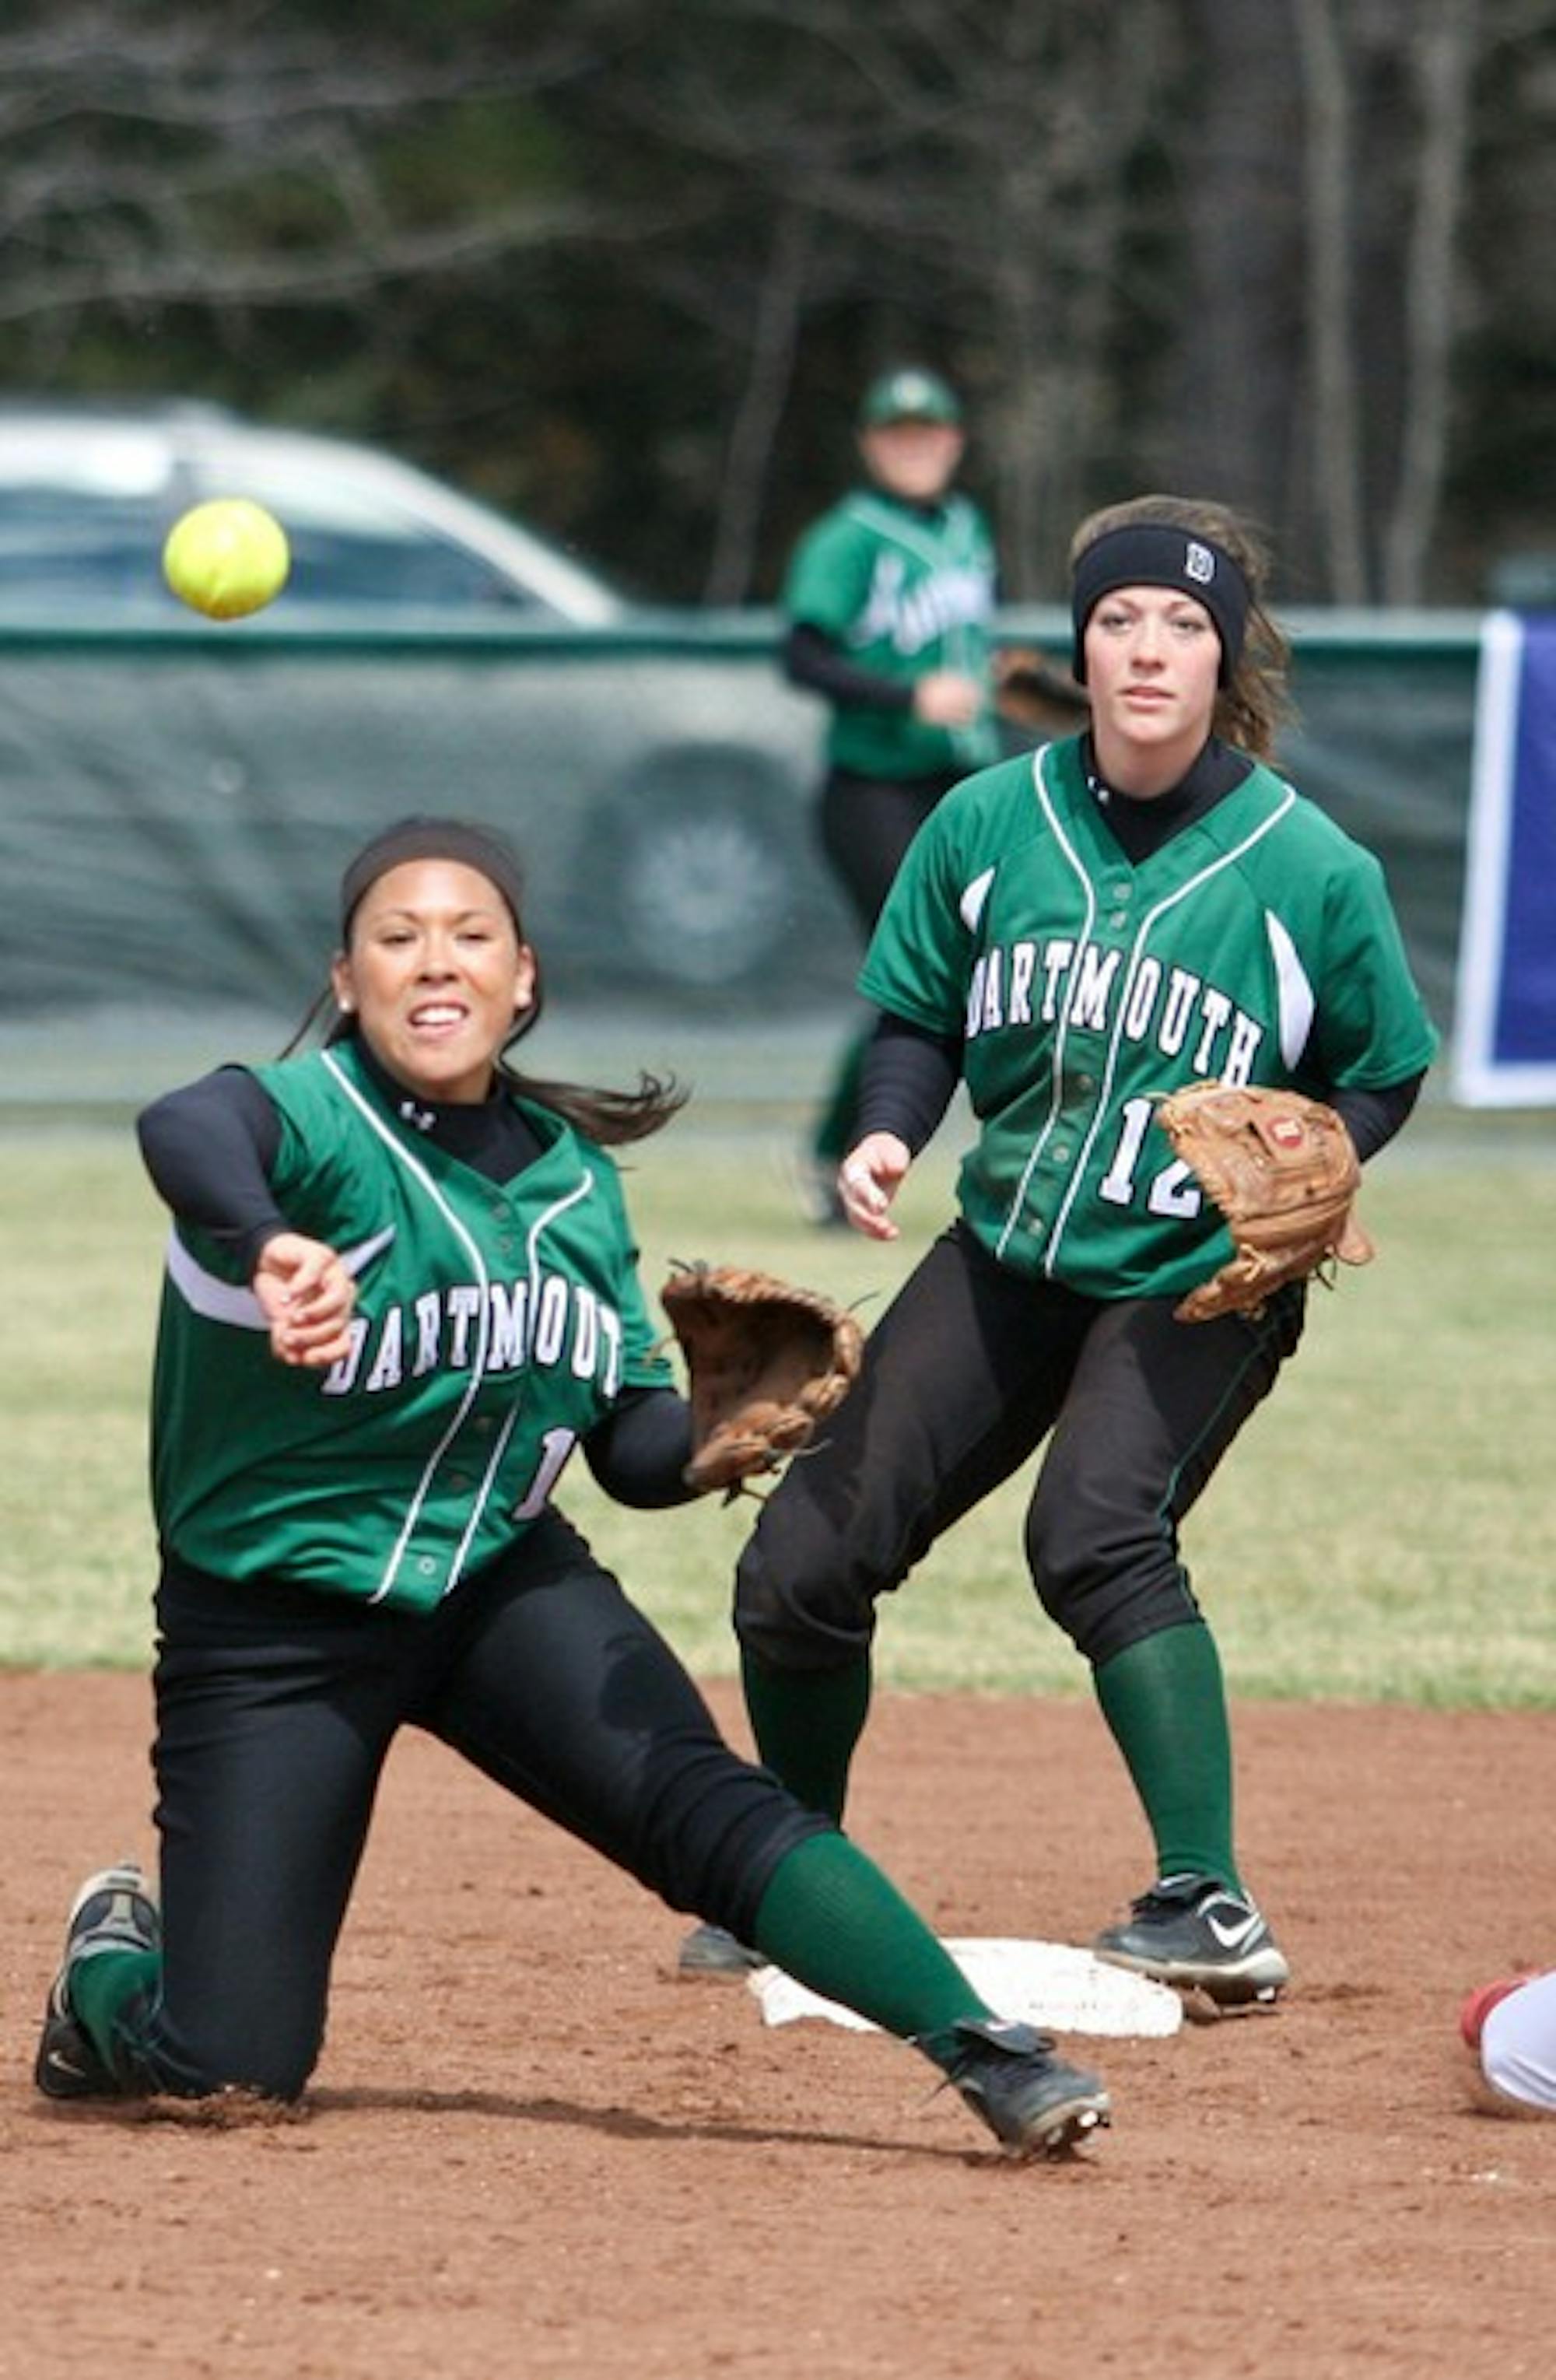 Christy Autin '10 and Kirsten Costello '10 combined for three hits in the Big Green's 5-1 victory against Cornell, Dartmouth's lone win in the series.